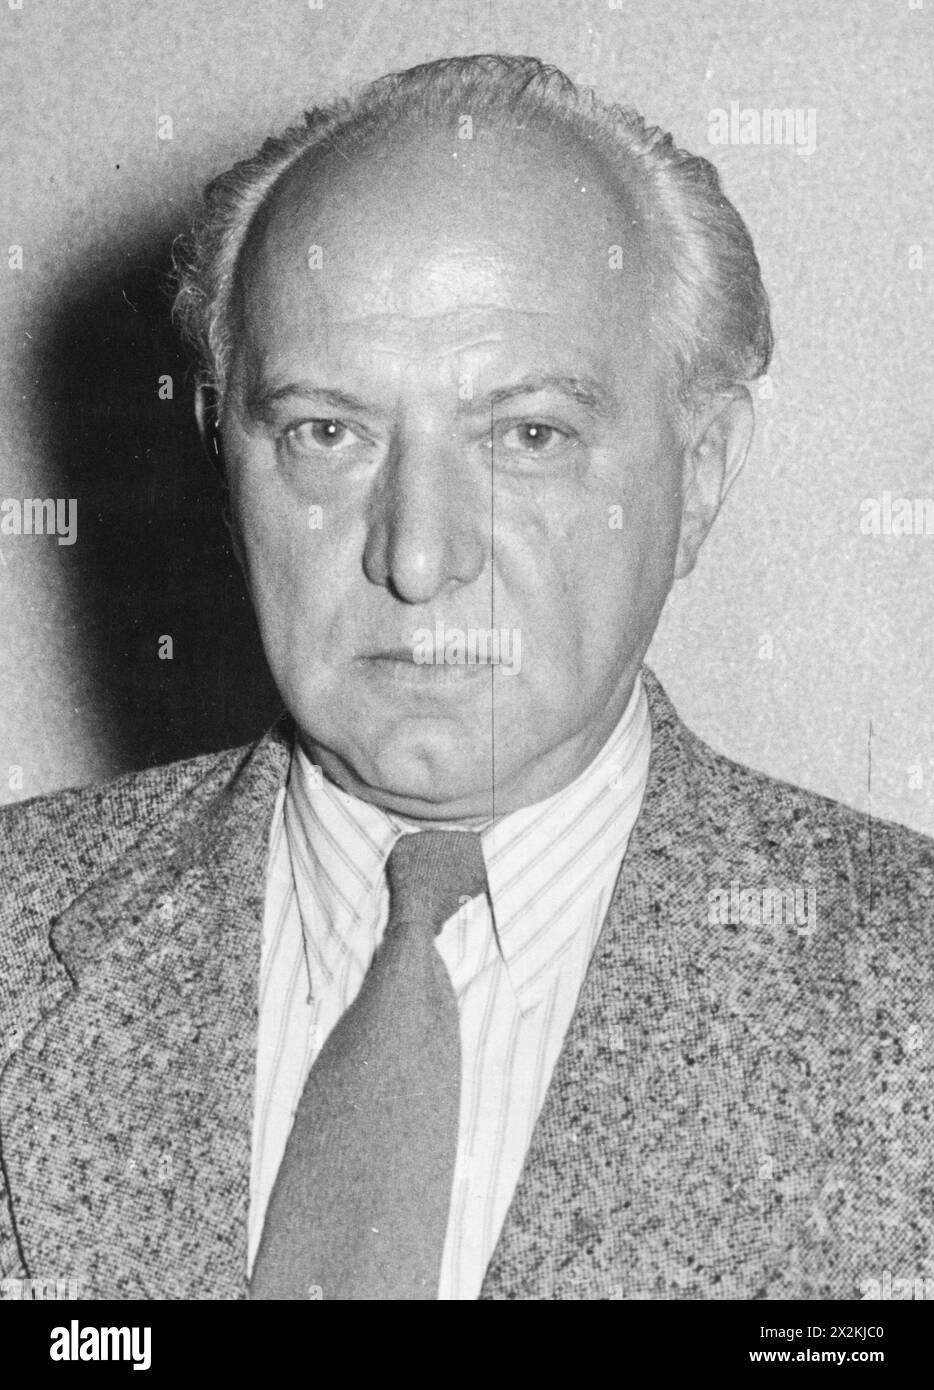 Schaefer, Hermann Rudolf, 6.4.1892 - 26.5.1966, German politician (Liberal Democratic Party), ADDITIONAL-RIGHTS-CLEARANCE-INFO-NOT-AVAILABLE Stock Photo